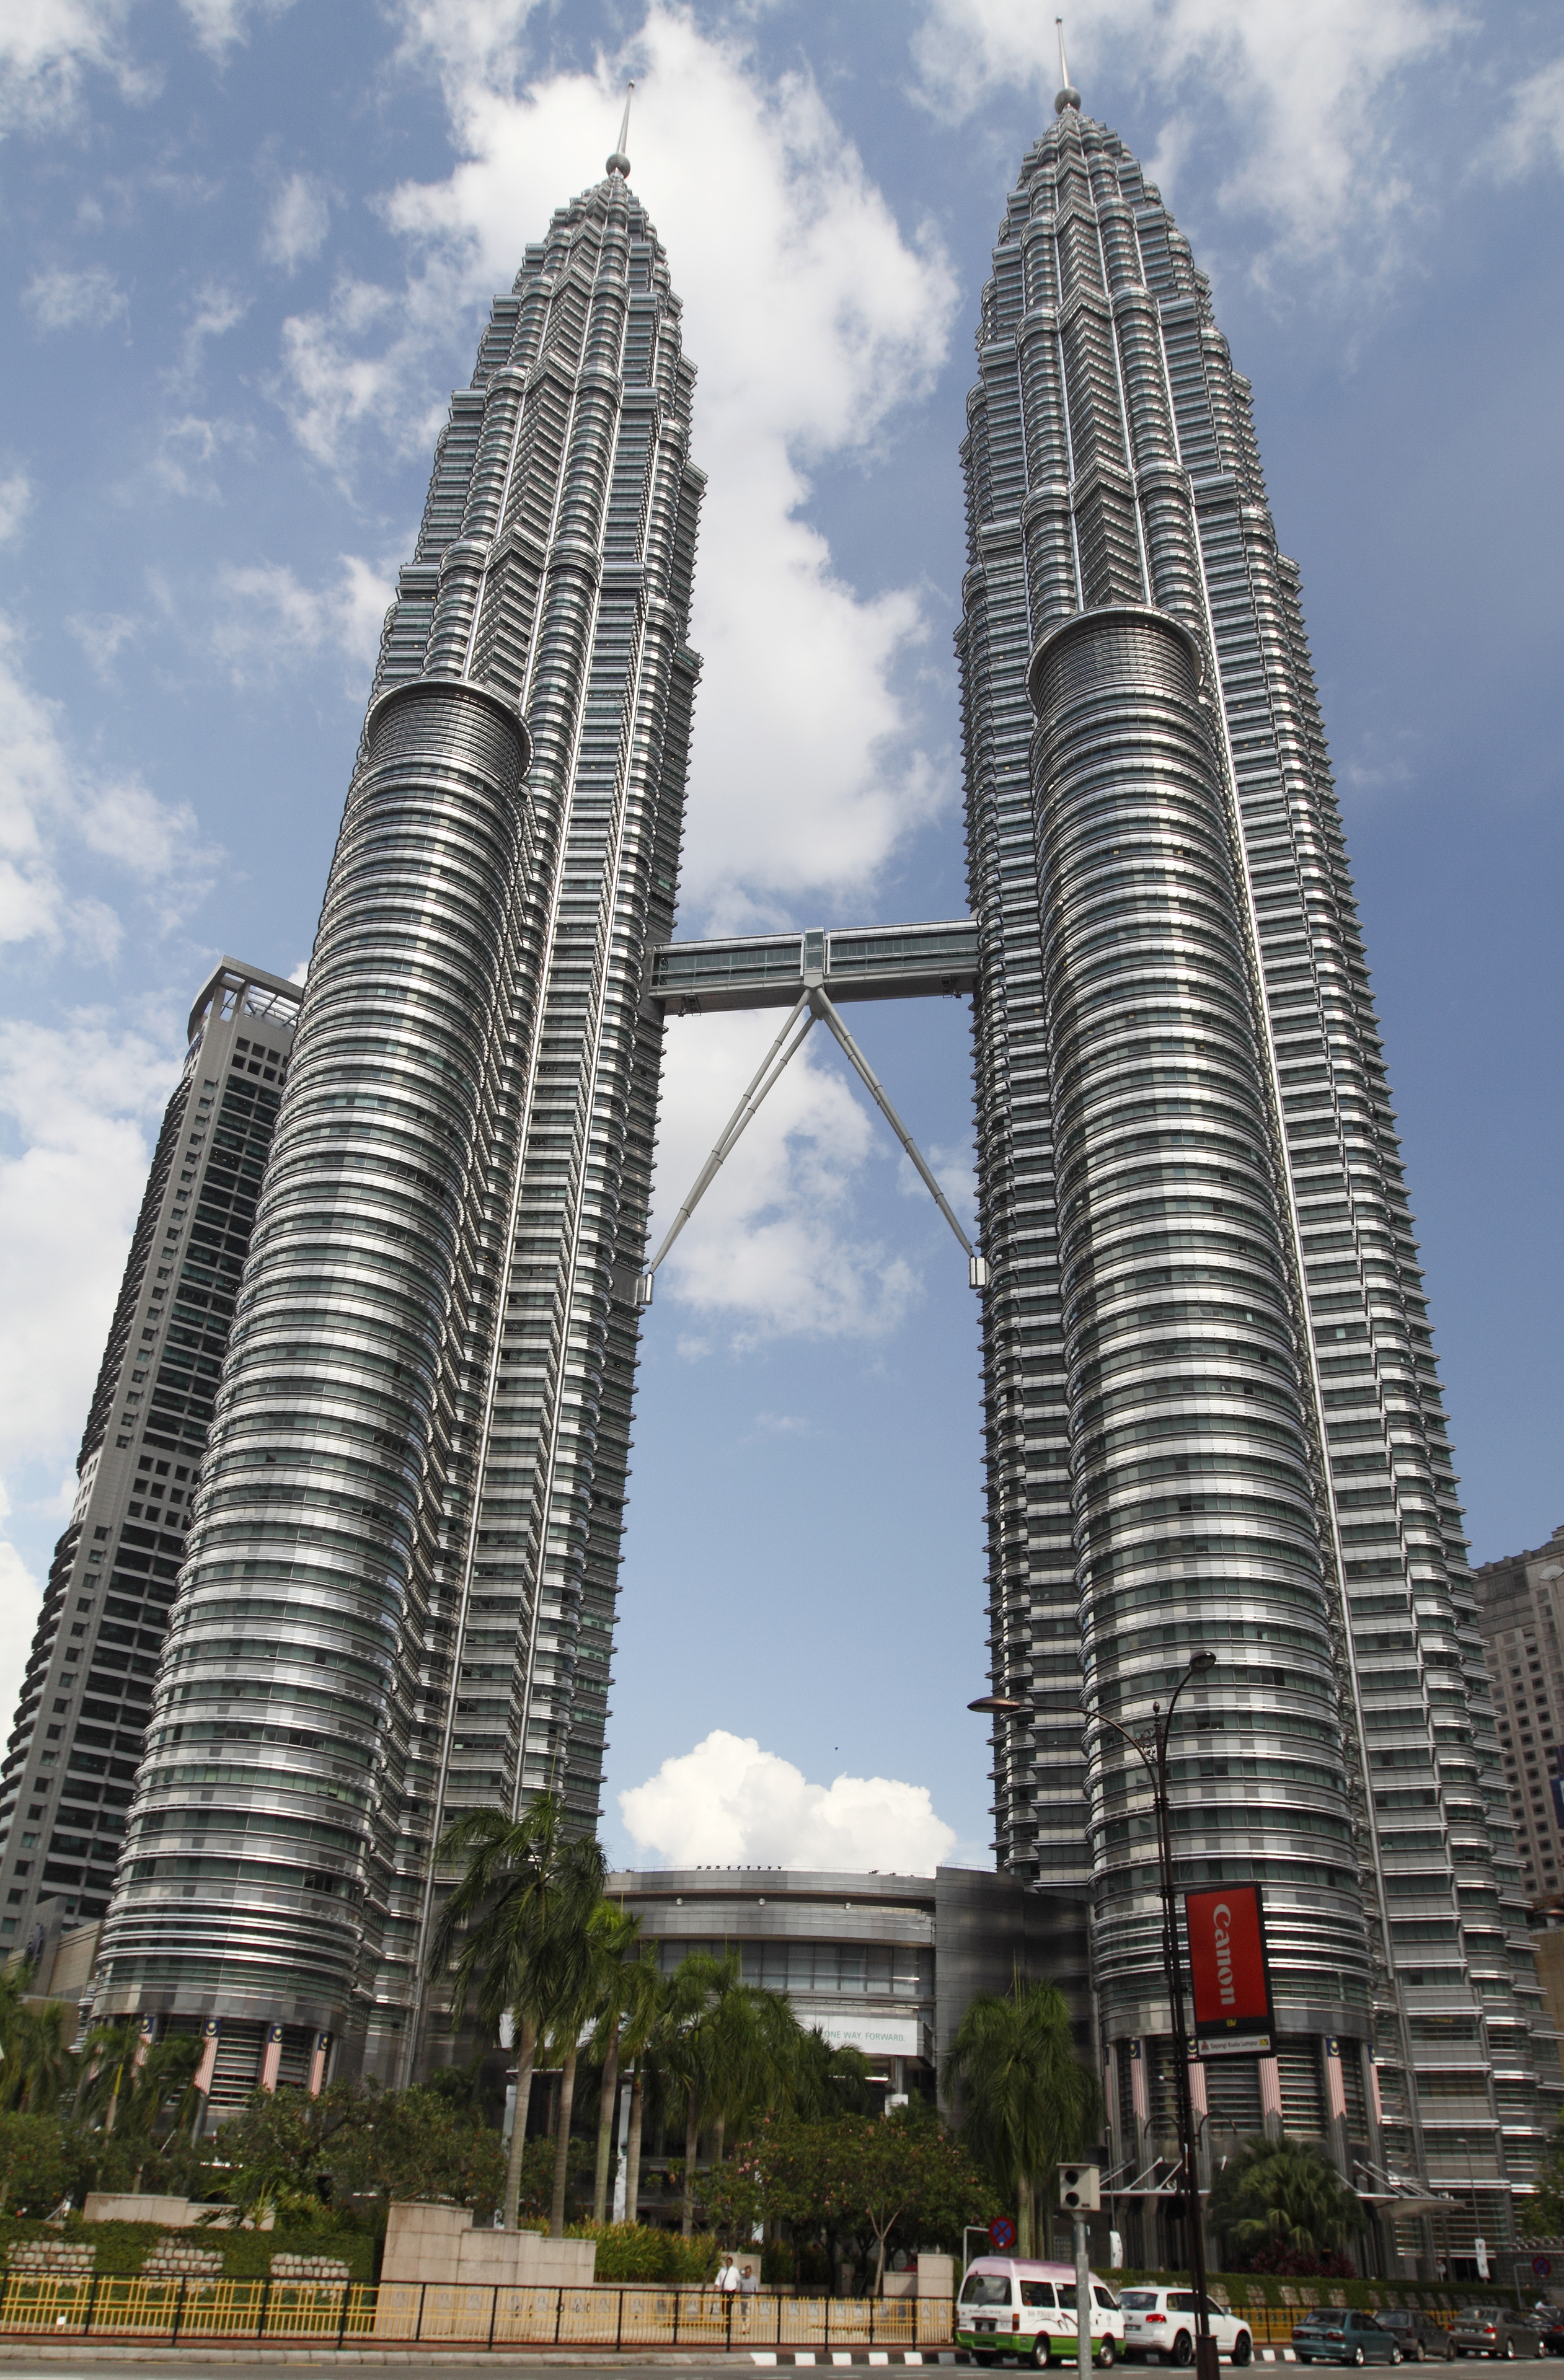 Images of Petronas Towers | 2523x3840